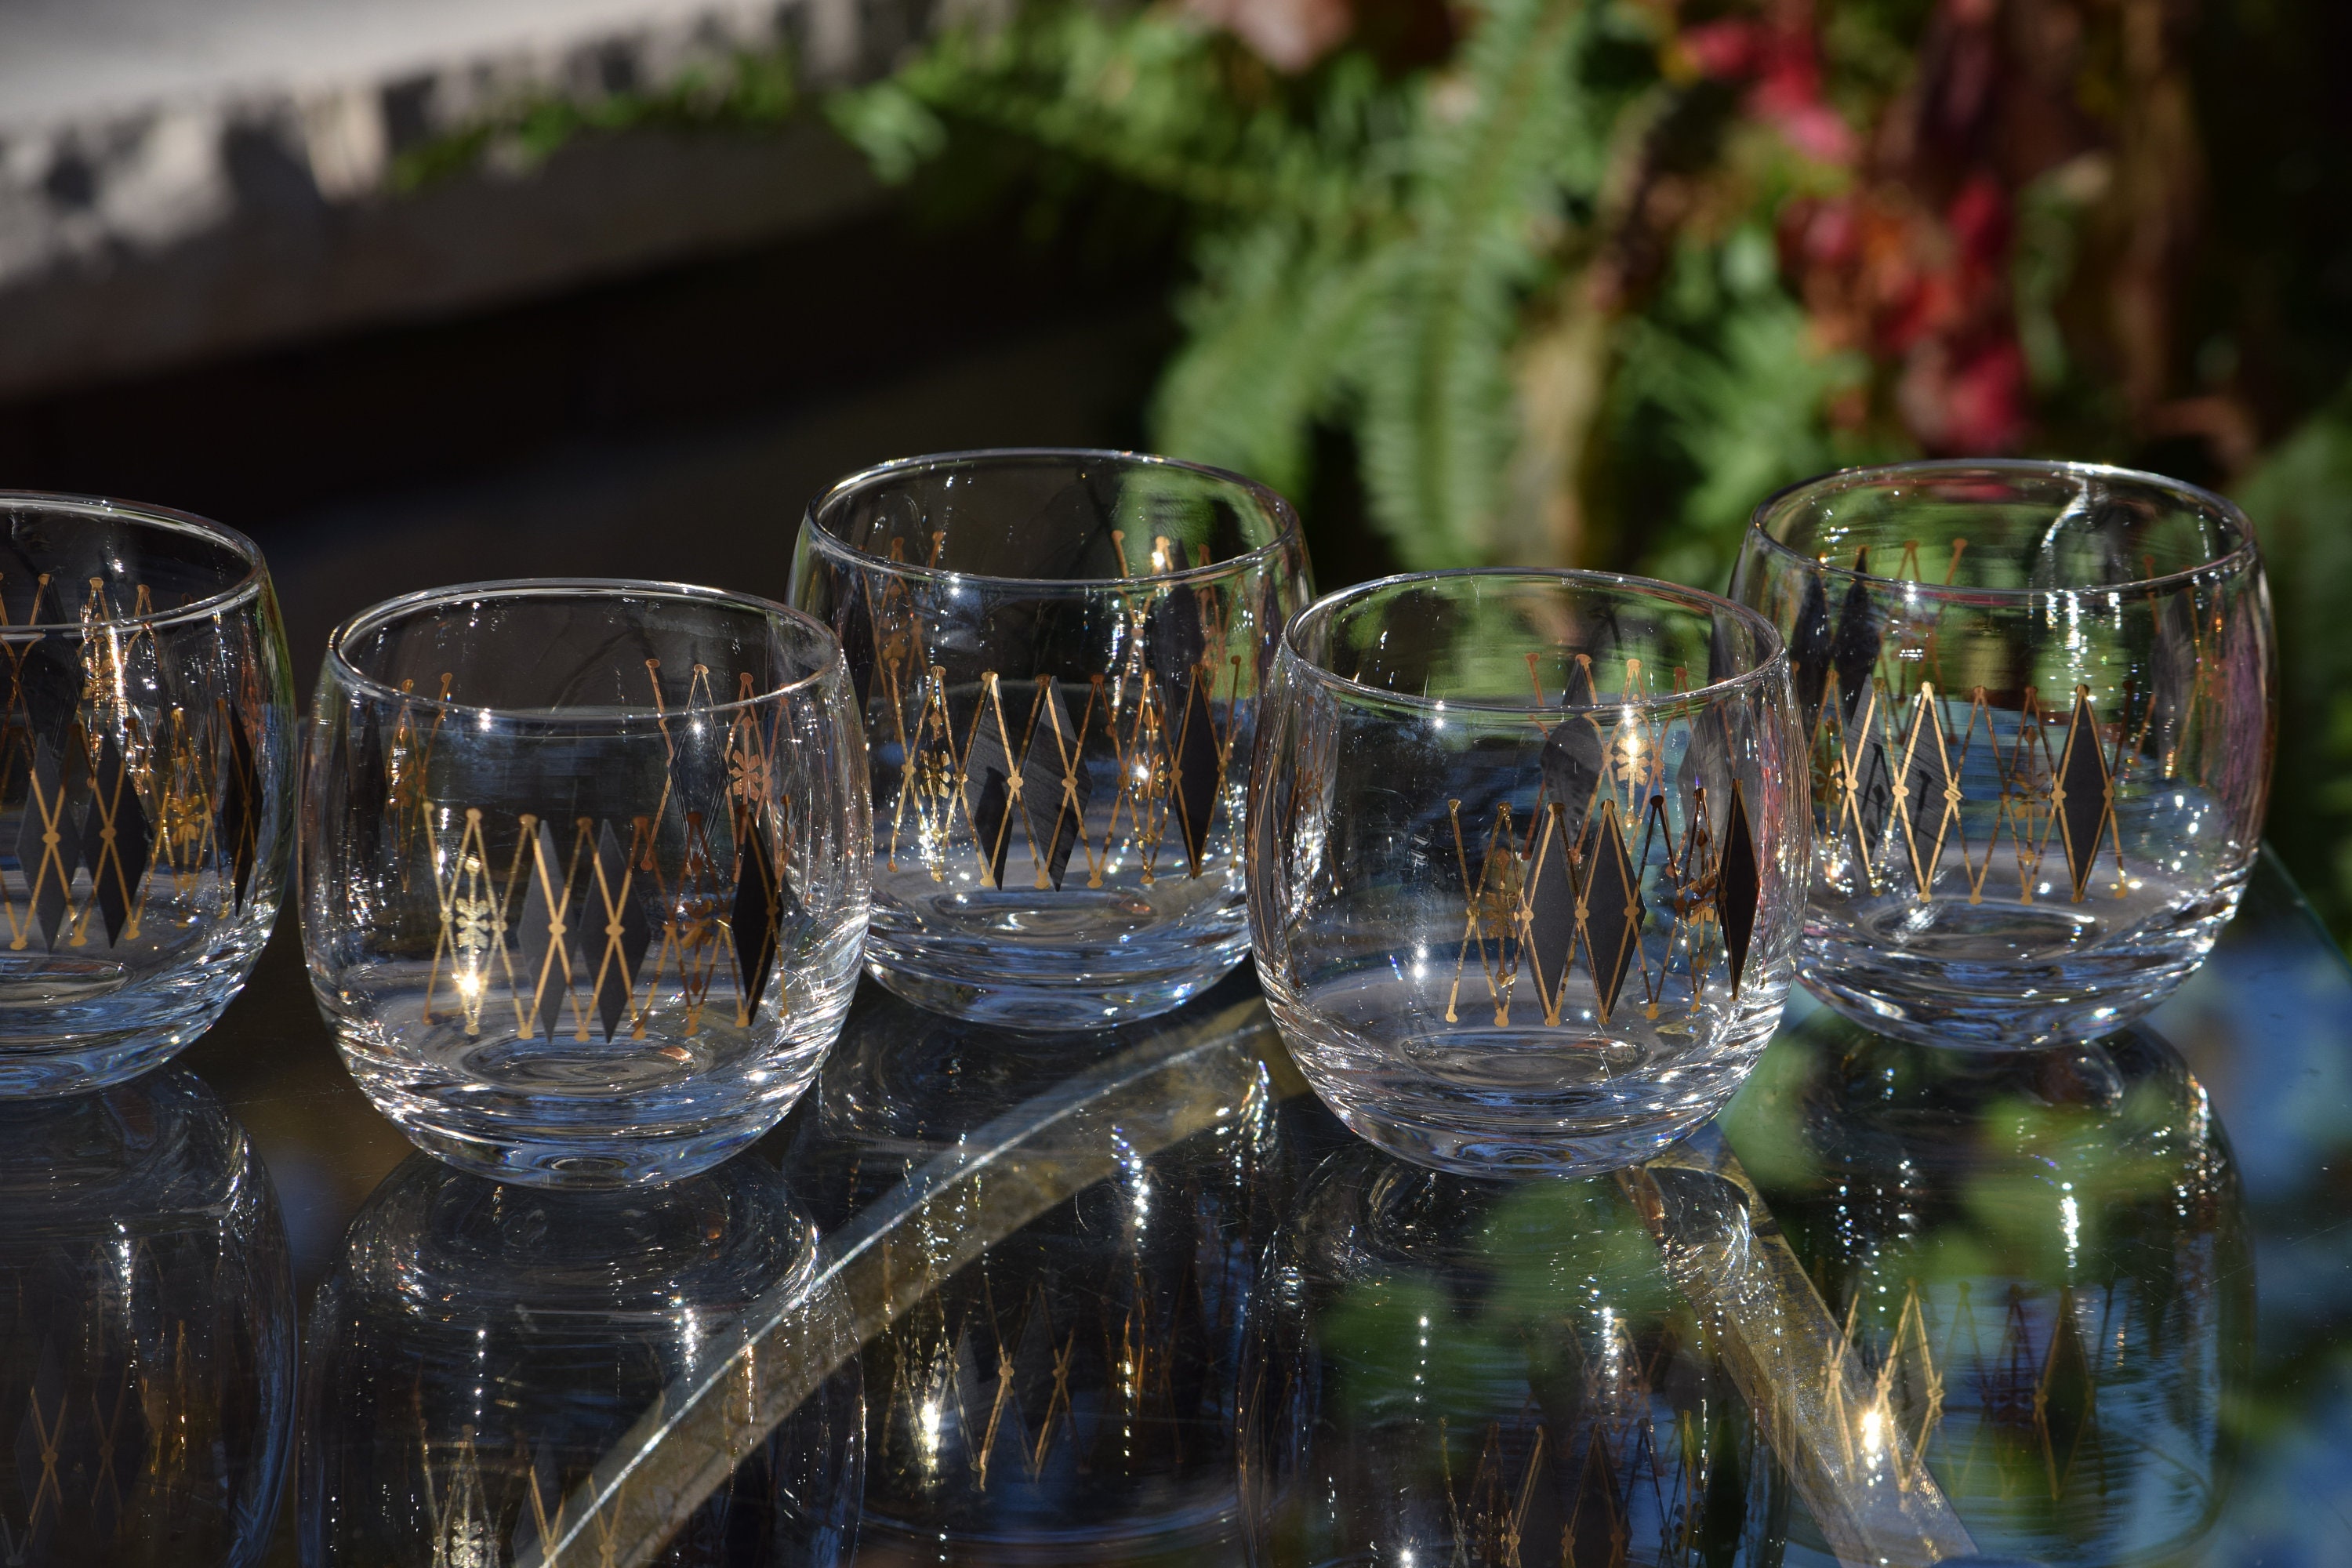 Mid Century Drinking Glasses in Caddy/ Set of 8 Signed Black and